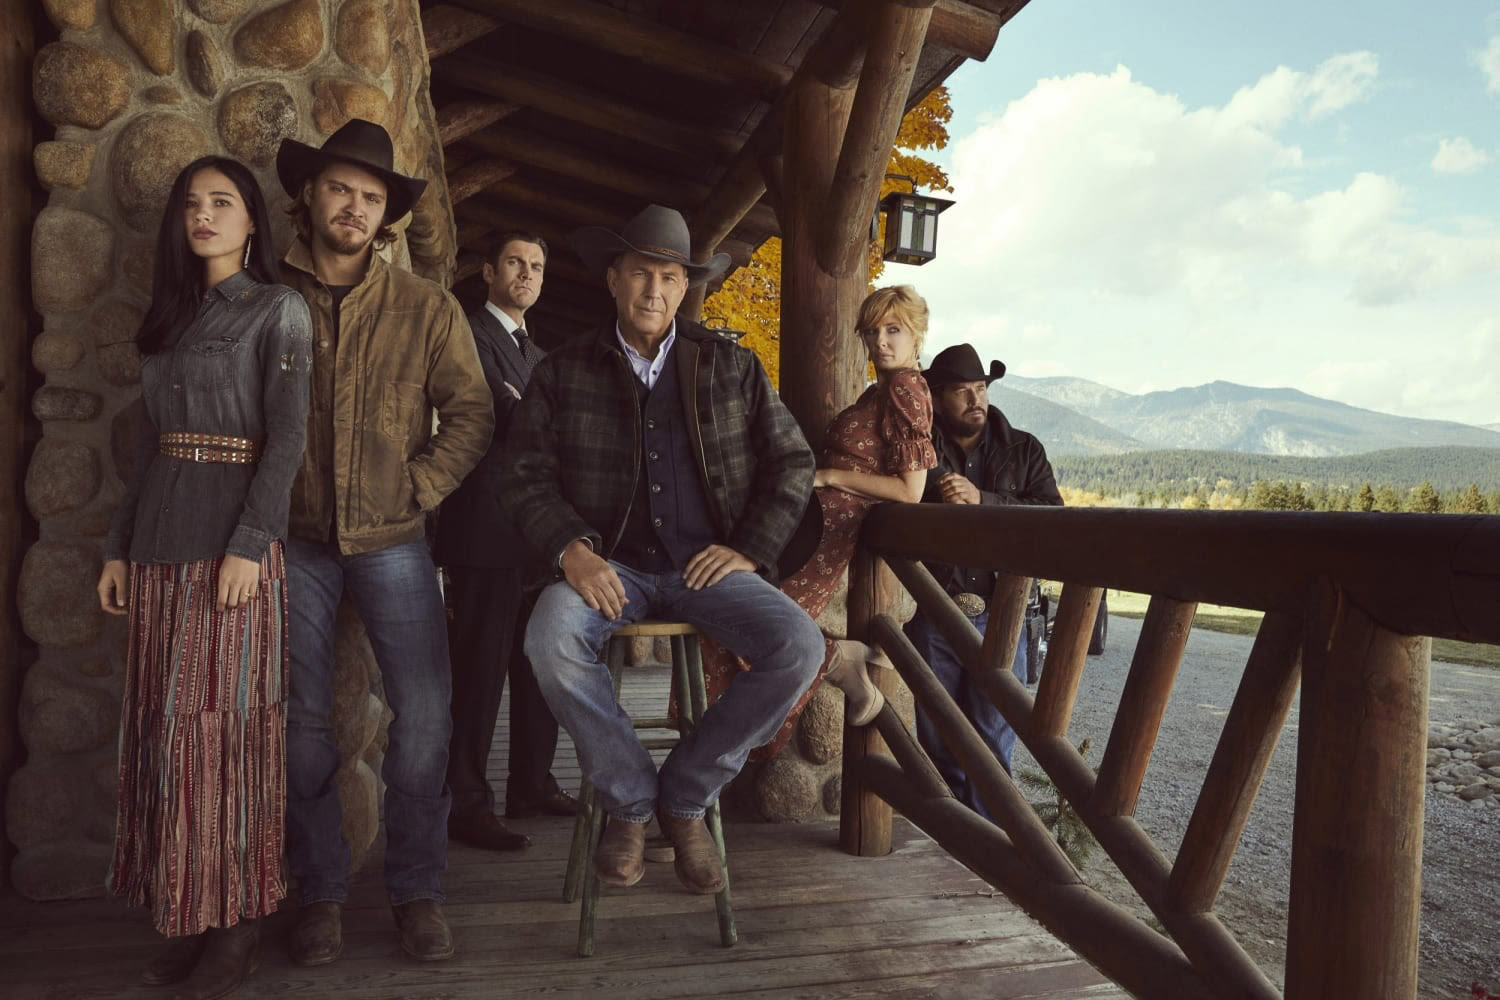 Yellowstone: Taylor Sheridan’s Matthew McConaughey Led Sequel Might Hit Television Record for Per Episode Salary But That’s Still...